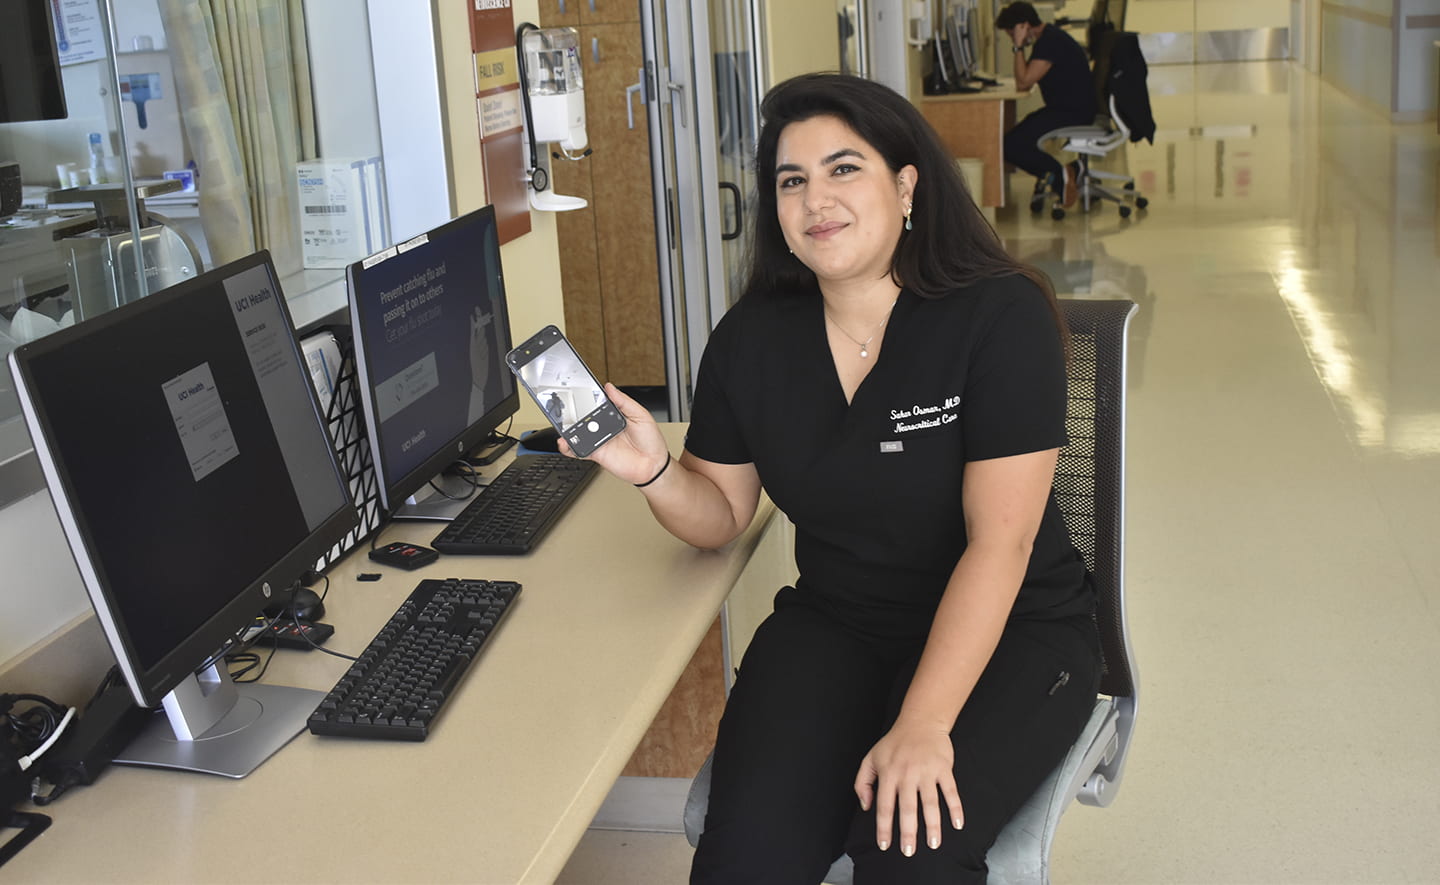 Dr. Sahar Osman, a neurocritical care fellow in UCI Medical Center’s neurological ICU. “With the coronavirus pandemic, everybody’s going through a universal trauma of sorts.”